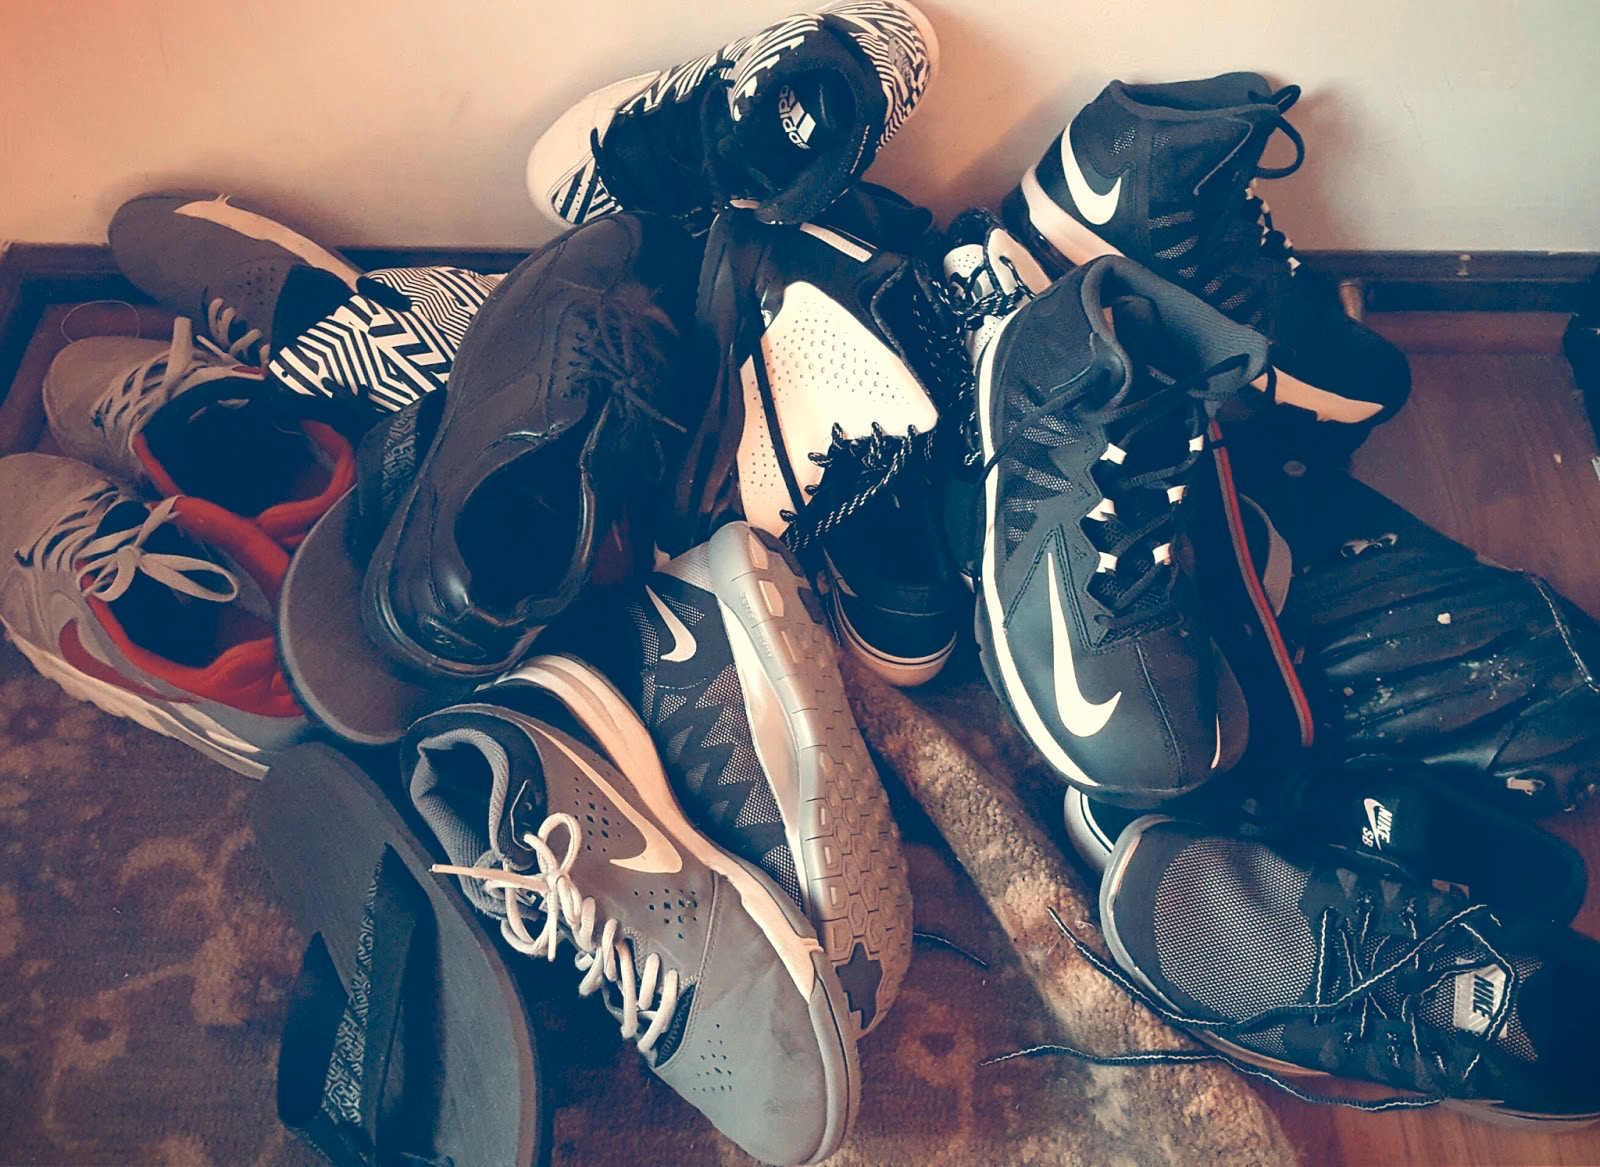 untidy stack of shoes thrown